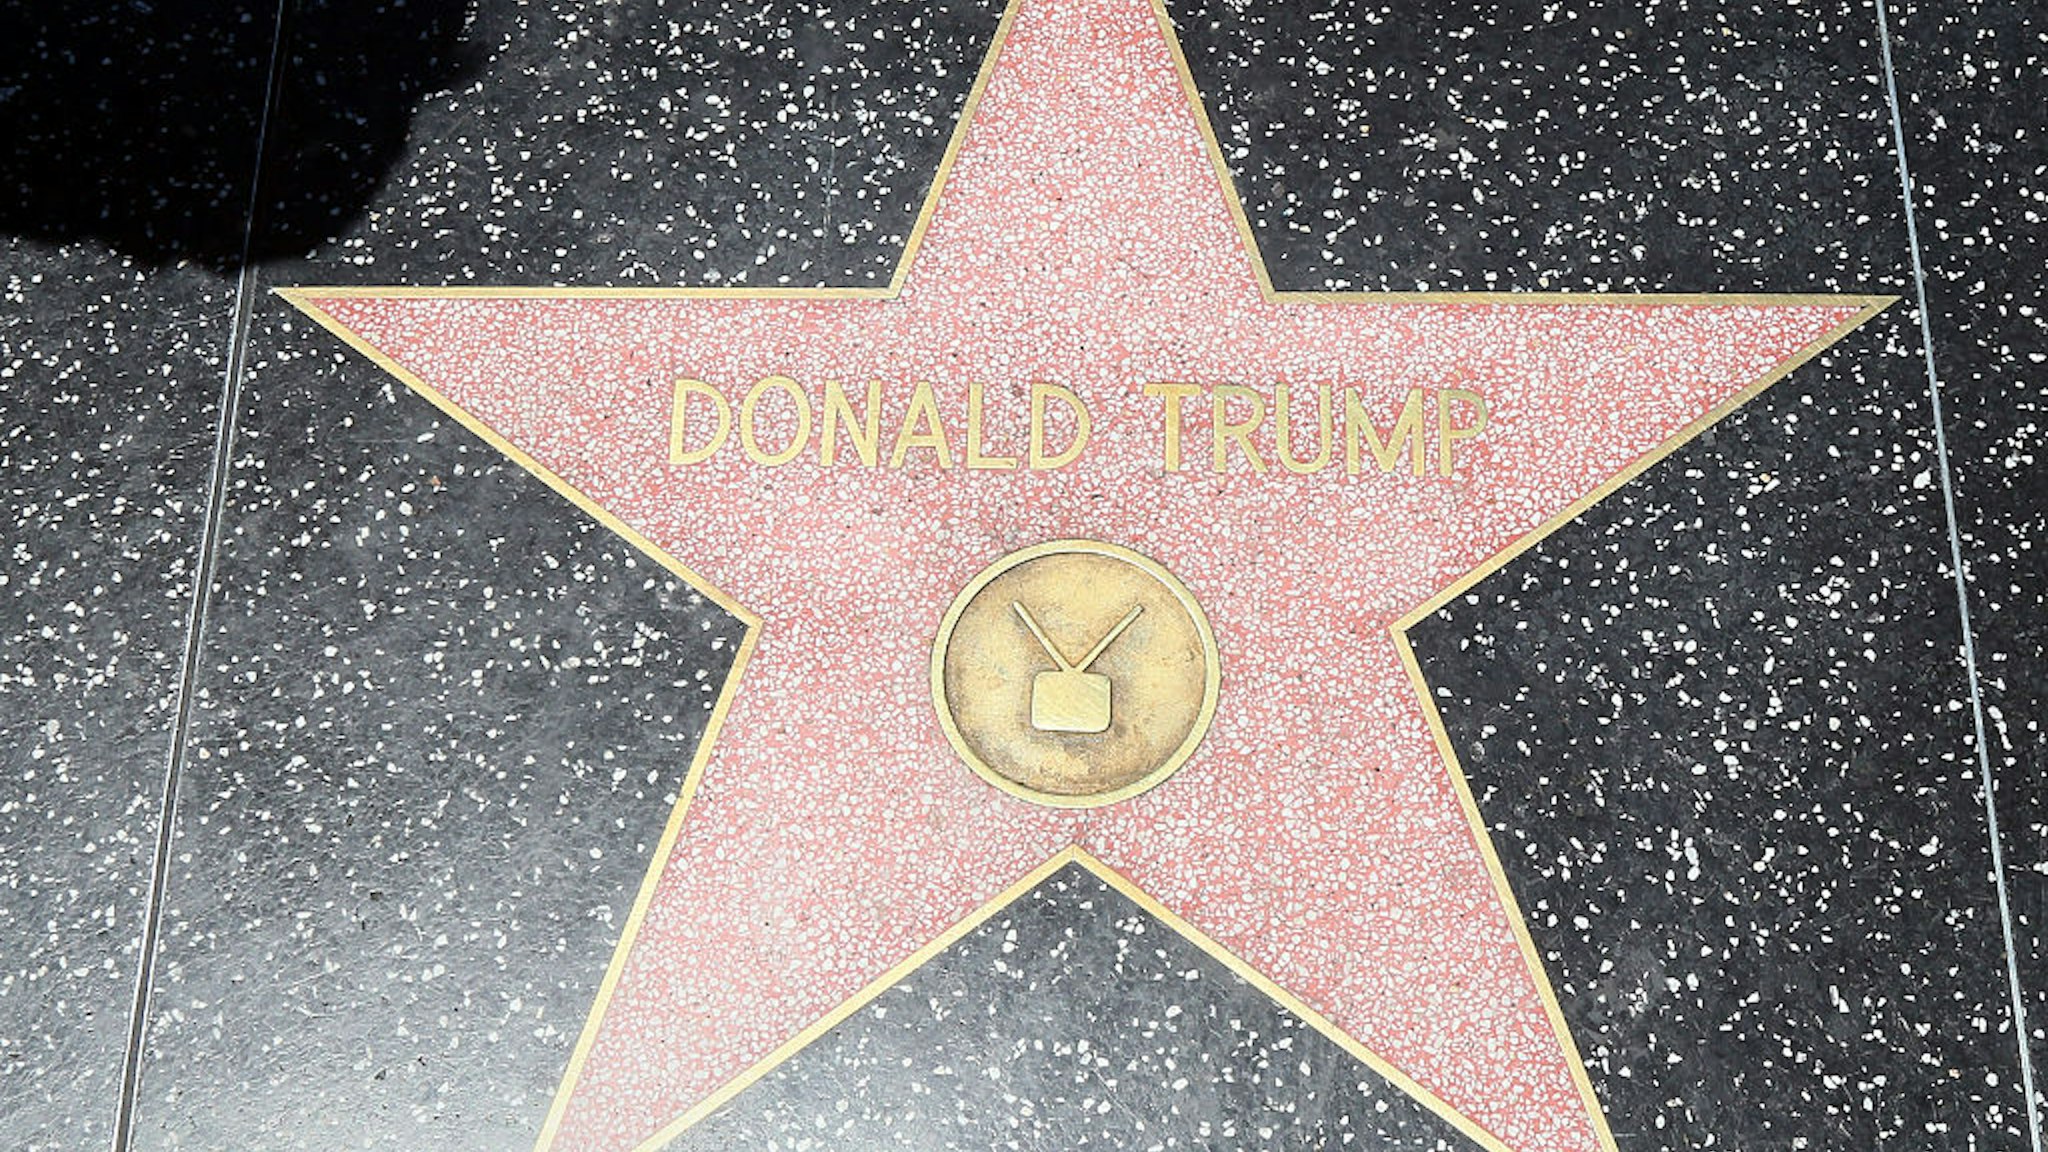 HOLLYWOOD, CA - JULY 20: The Hollywood Walk of Fame Star of Donald Trump is seen on July 20, 2016 in Hollywood, California.